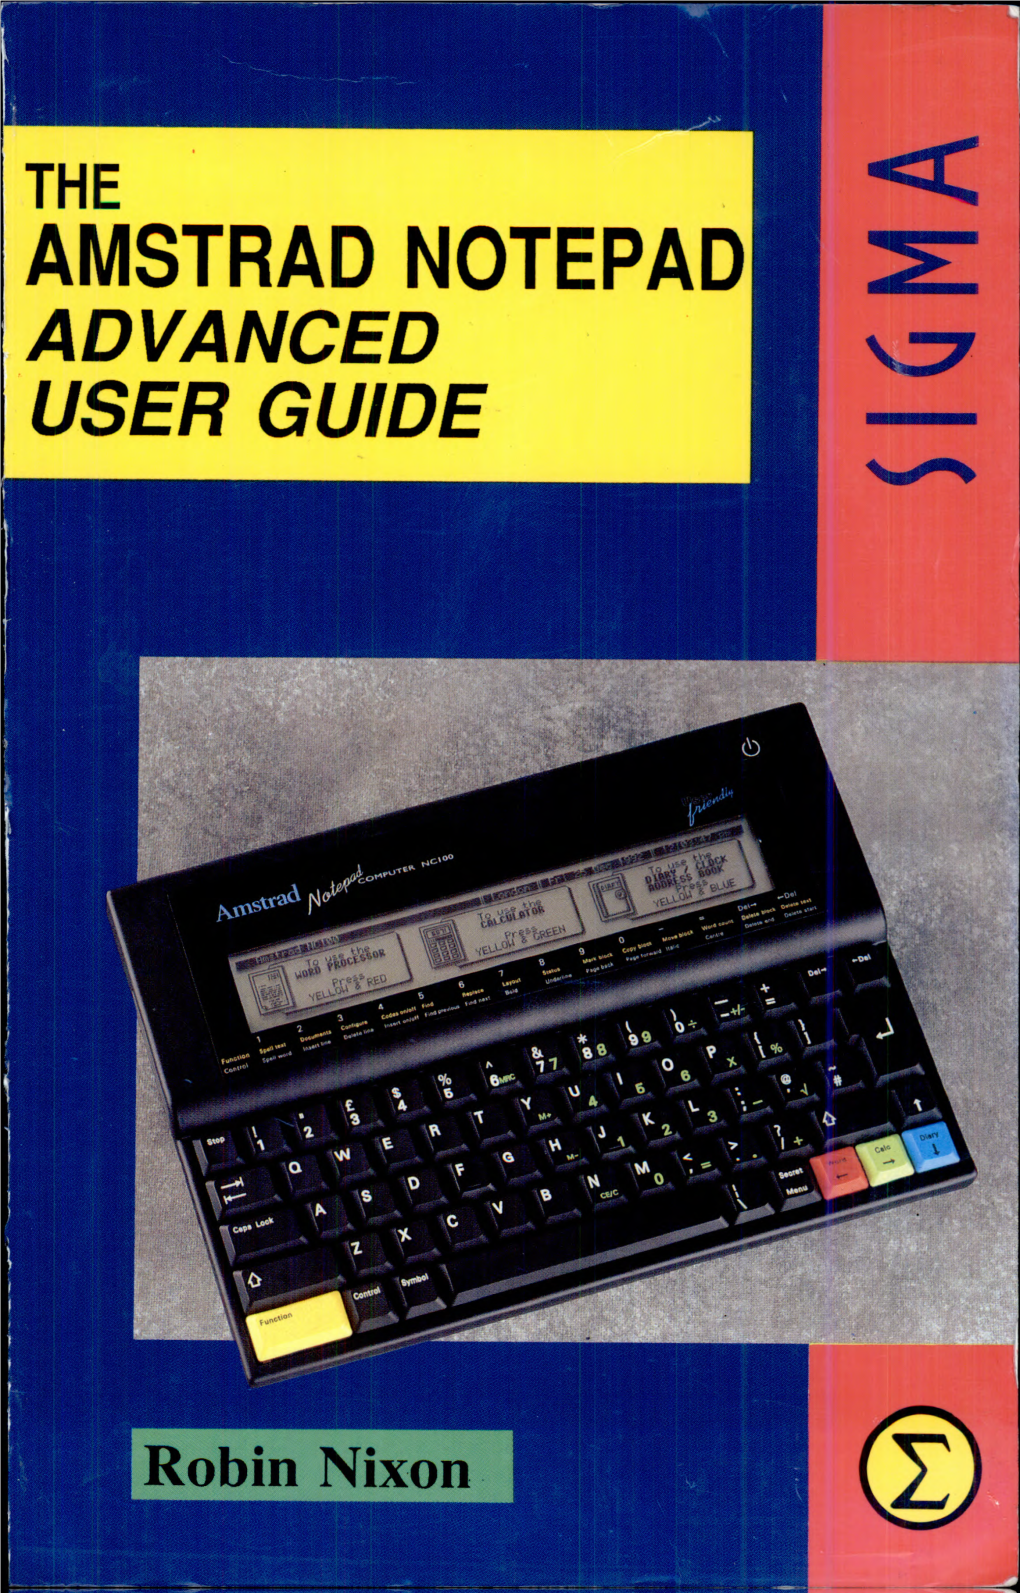 The Amstrad Notepad Advanced User Guide